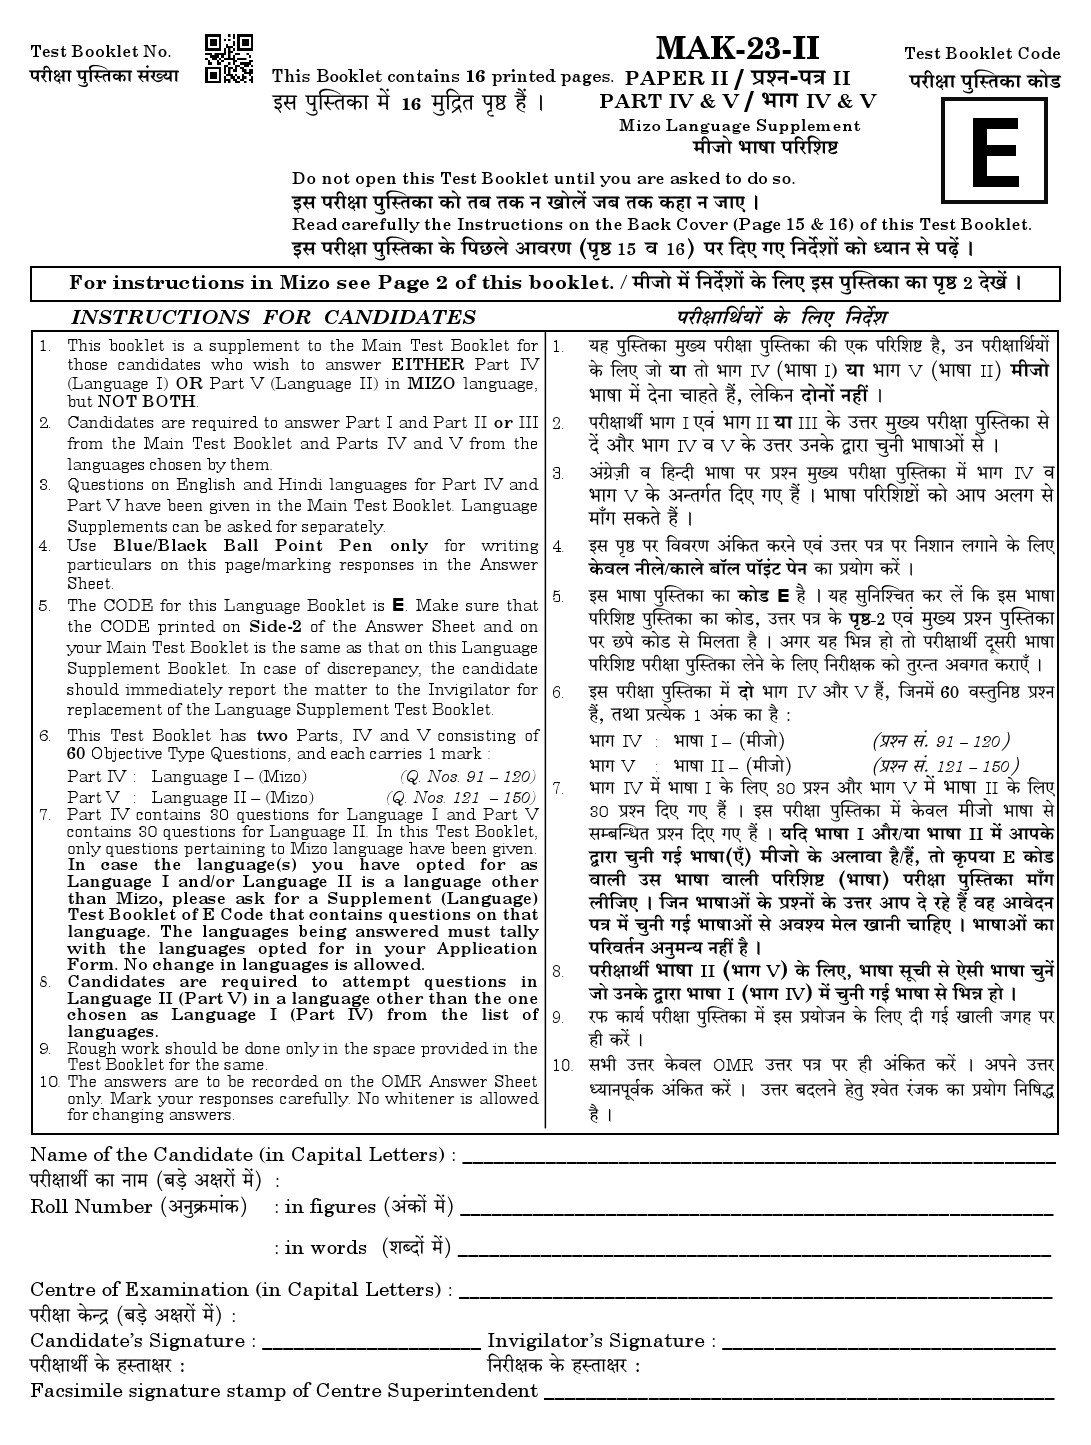 CTET August 2023 Mizo Language Supplement Paper II Part IV and V 1